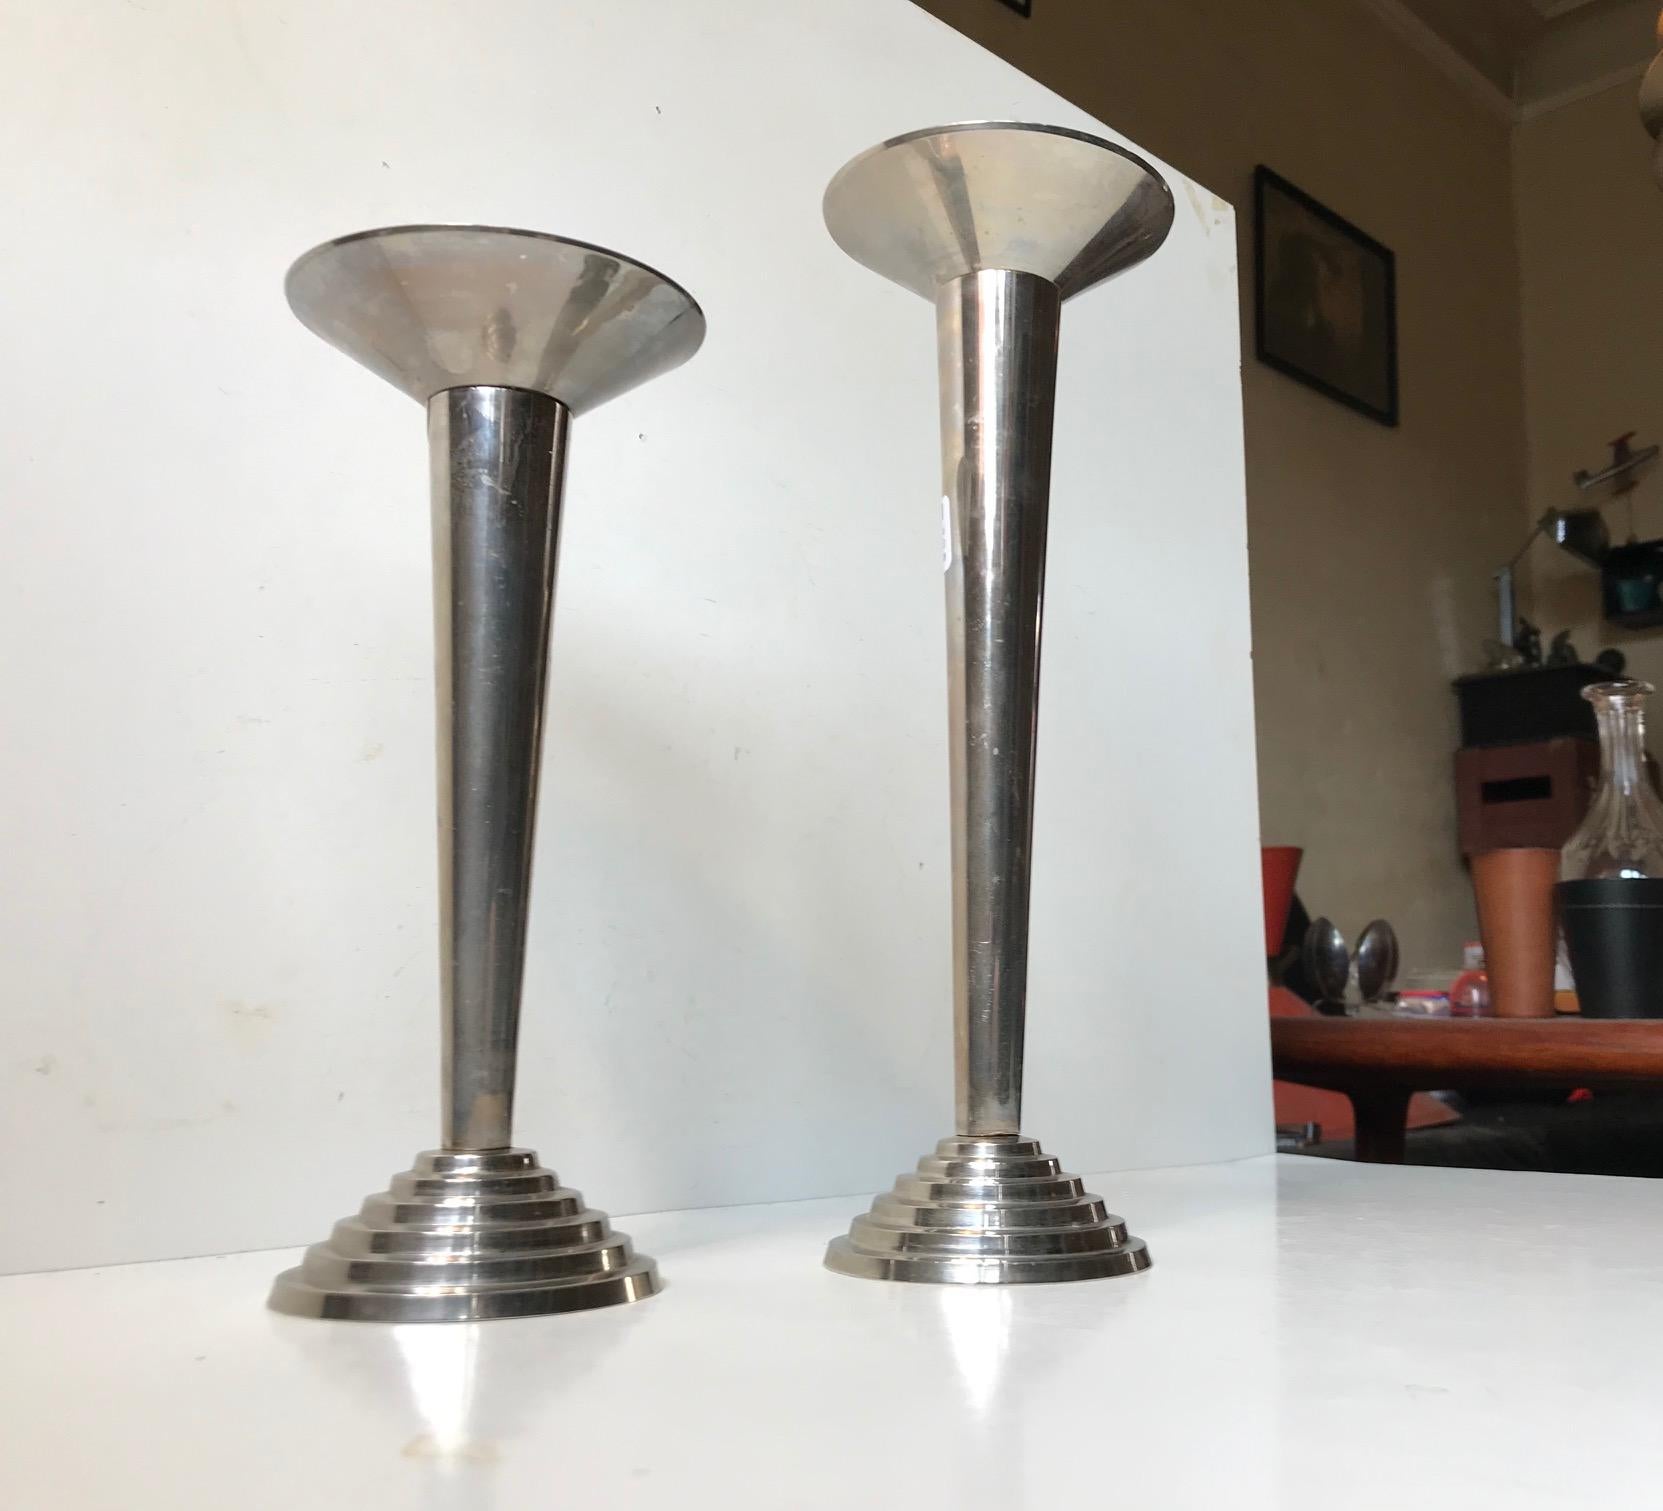 A set of Art Deco styled candlesticks. 'Staired' architecturally inspired base in engine turned aluminium. The tubes and candle holder are standard in size and made from stainless steel. Manufactured in Germany prior to WW II. Measures: Heights